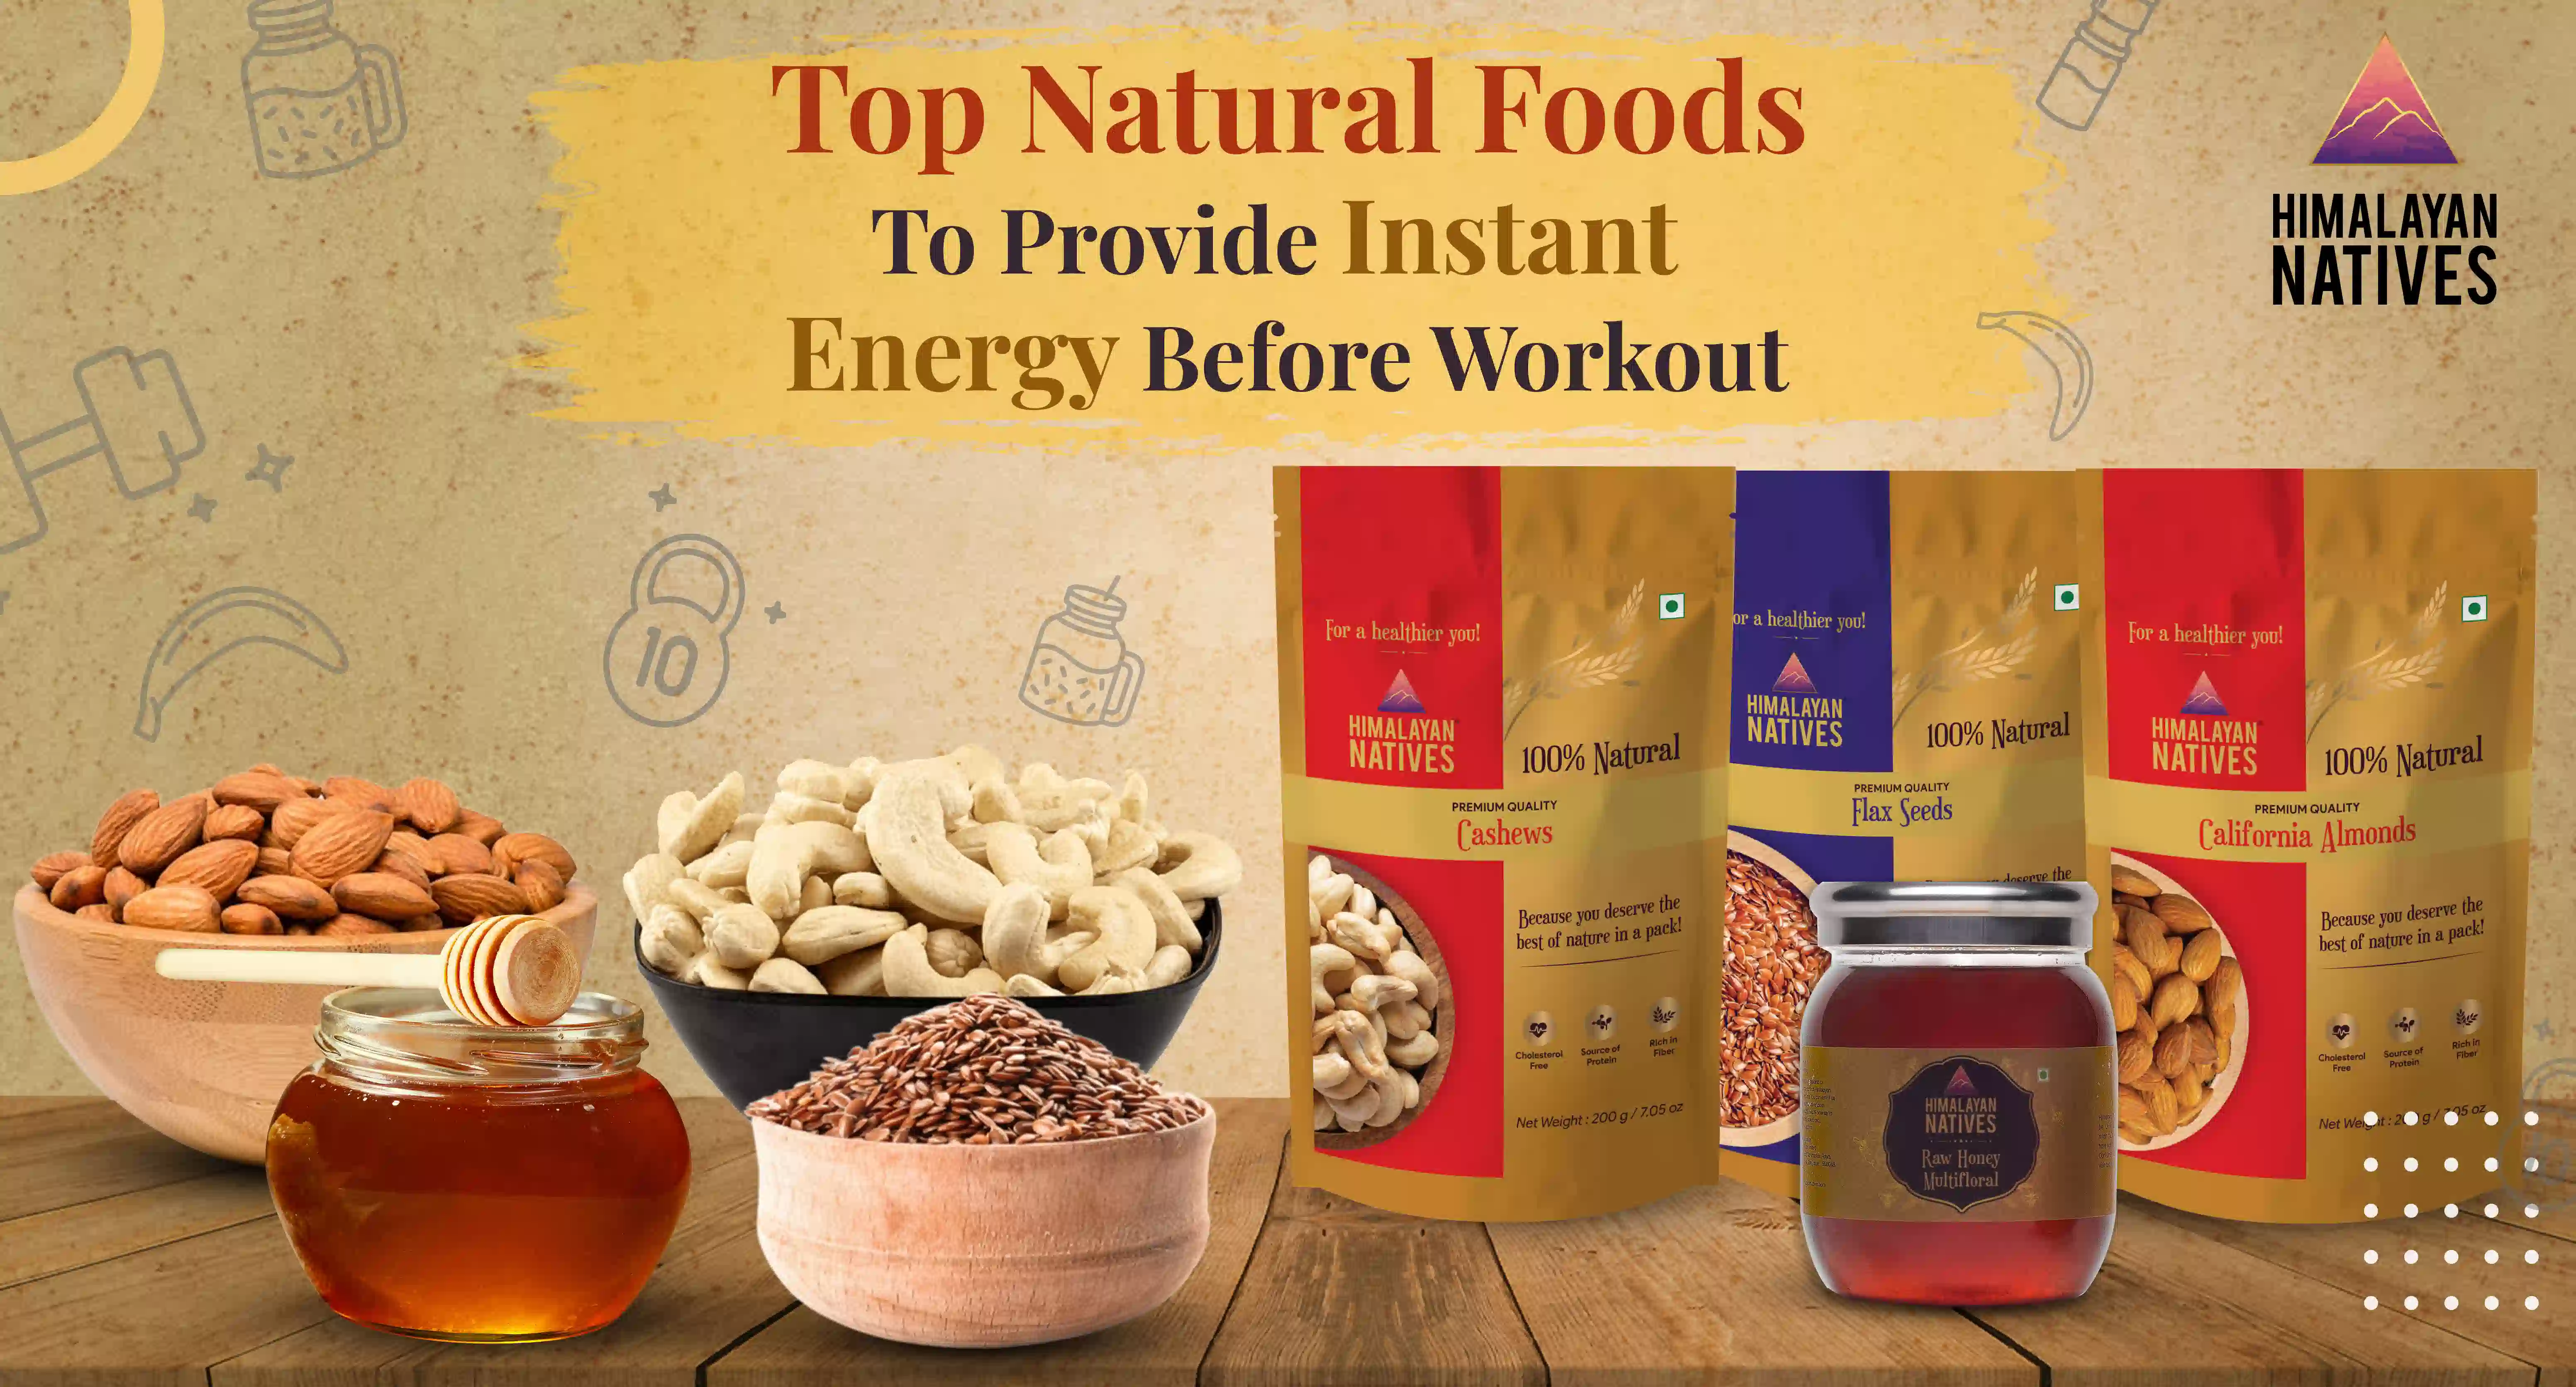 Top Natural Foods To Provide Instant Energy Before Workout